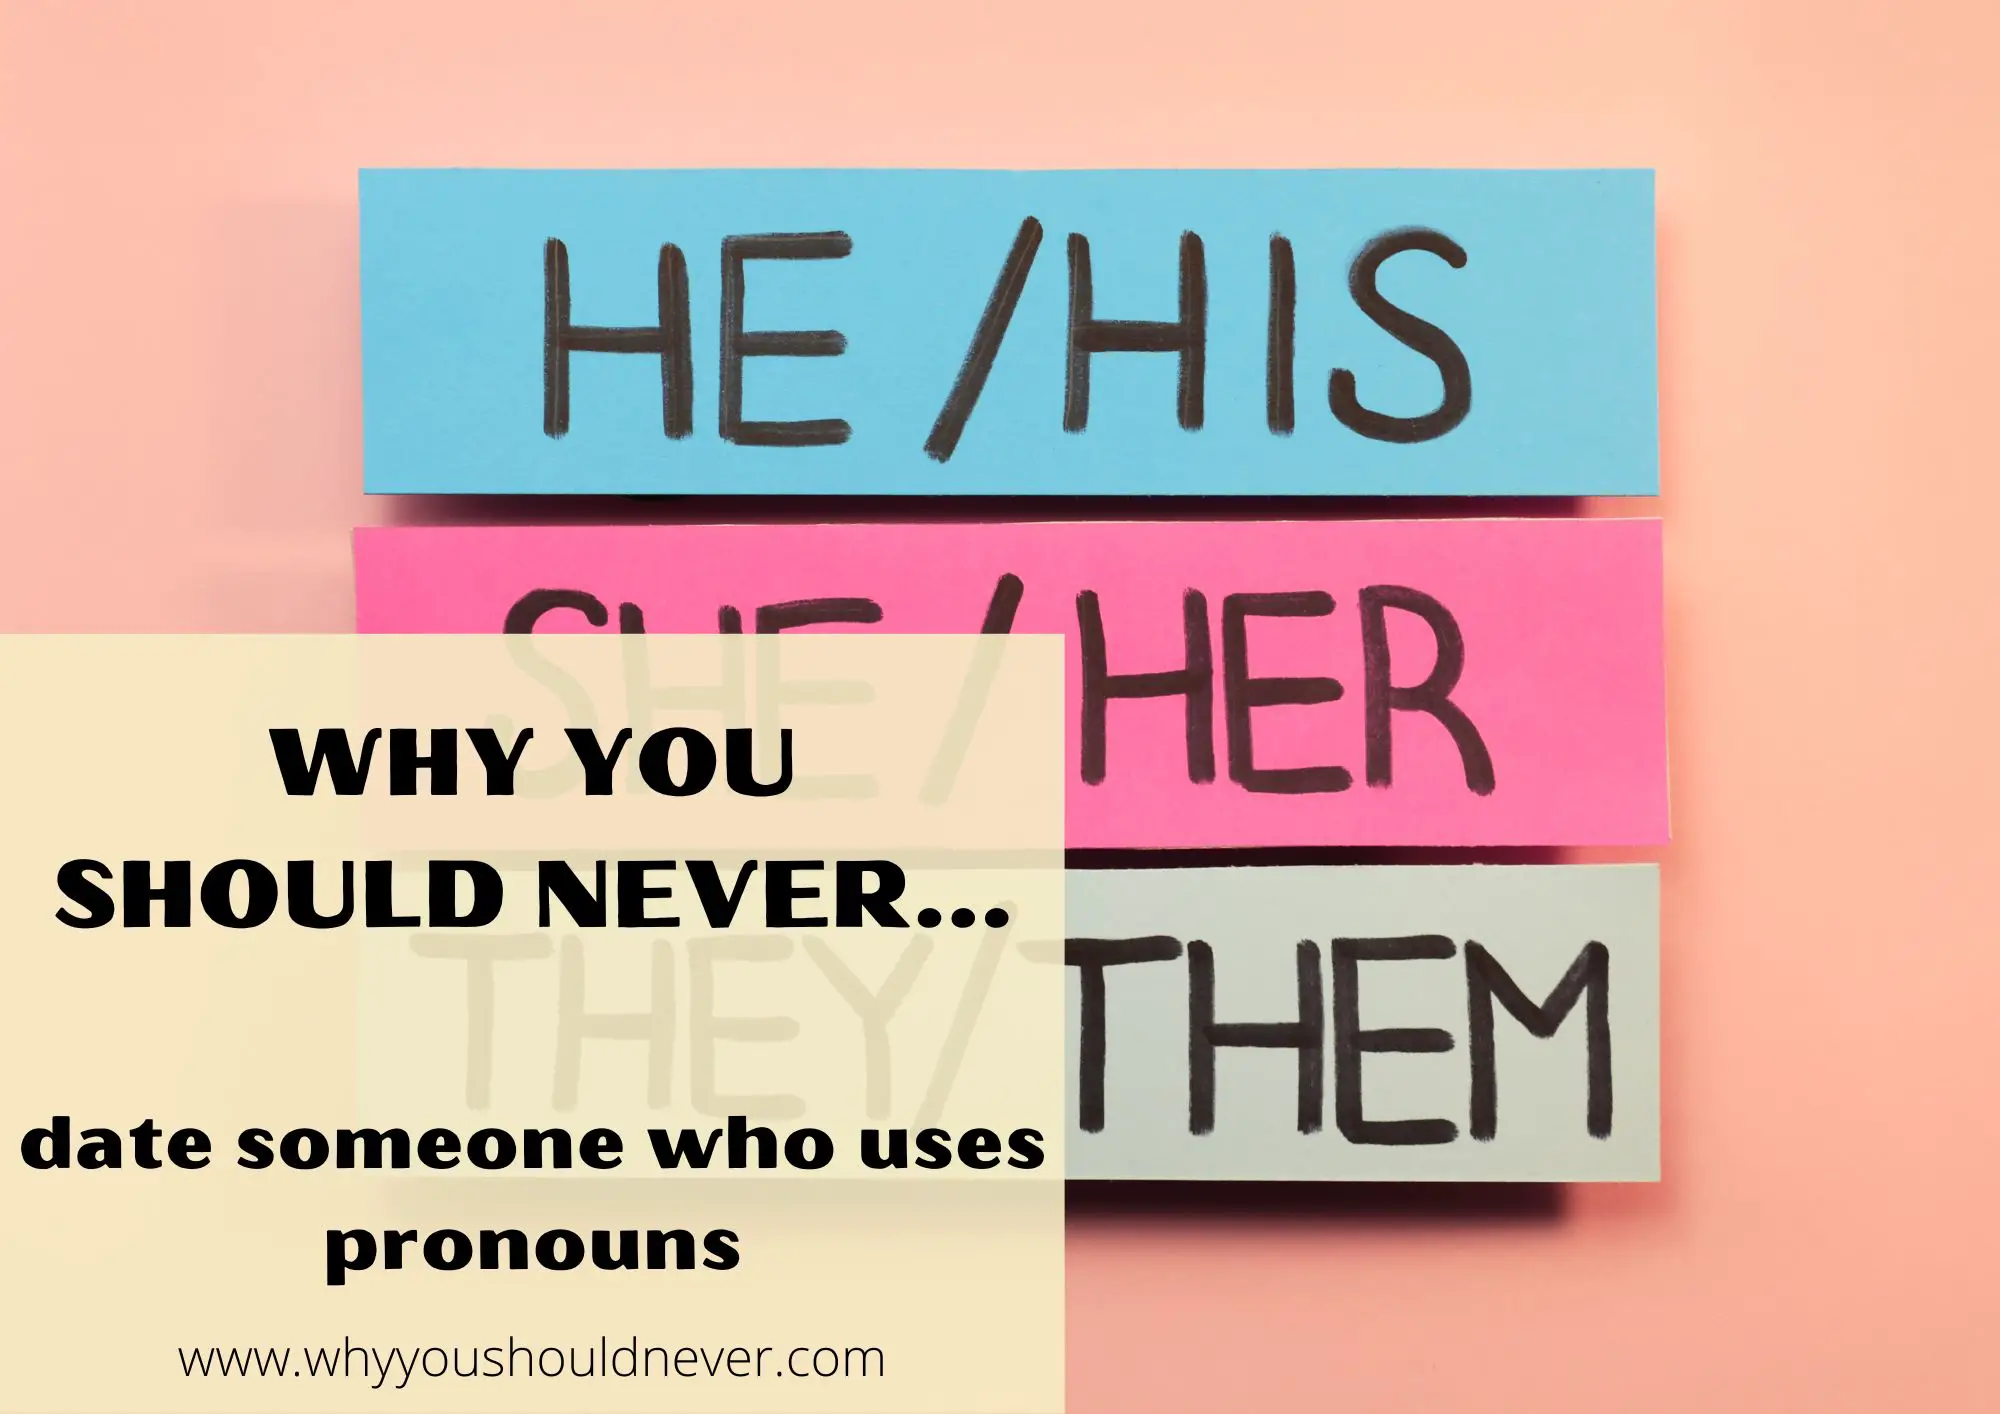 Why You Should Never Date Someone Who Uses Pronouns